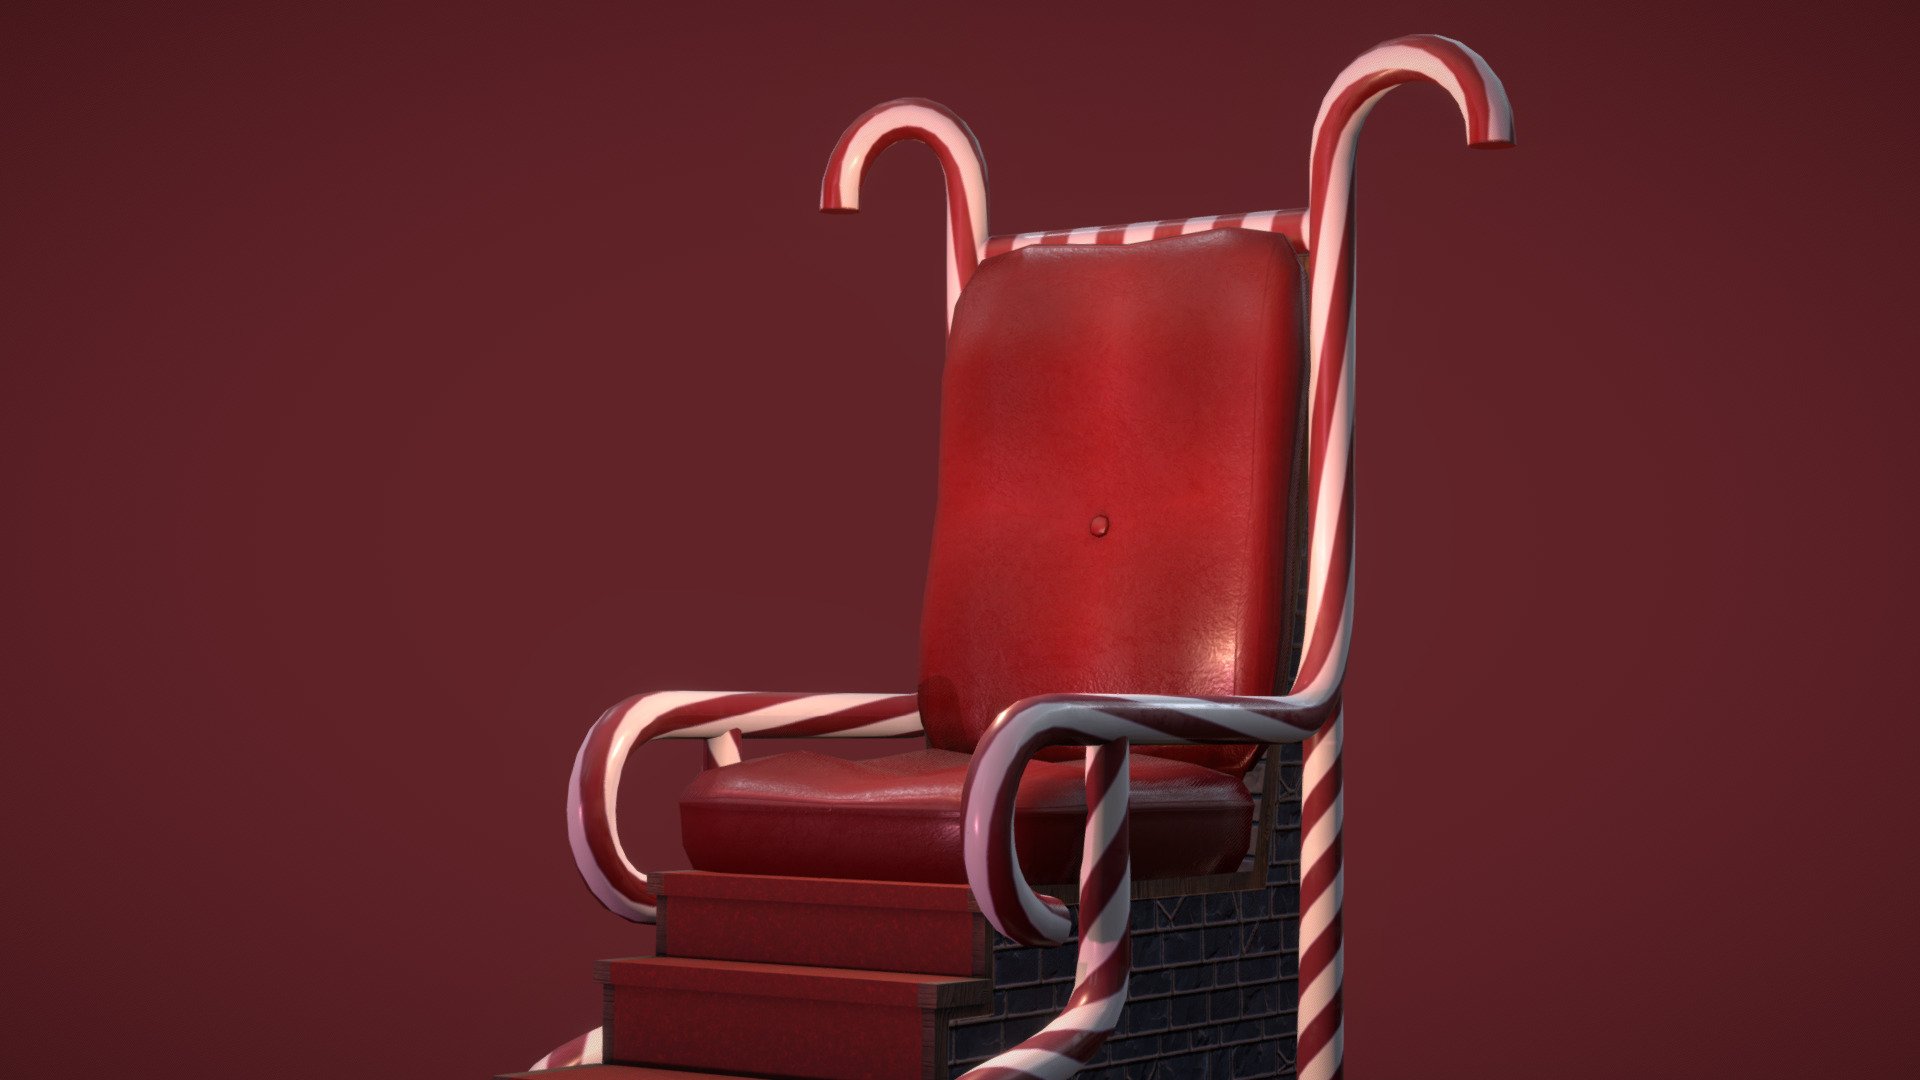 Come sit on Santa's lap and tell him what you want for Christmas.
Entry for the #Holiday2020Challenge 3d model